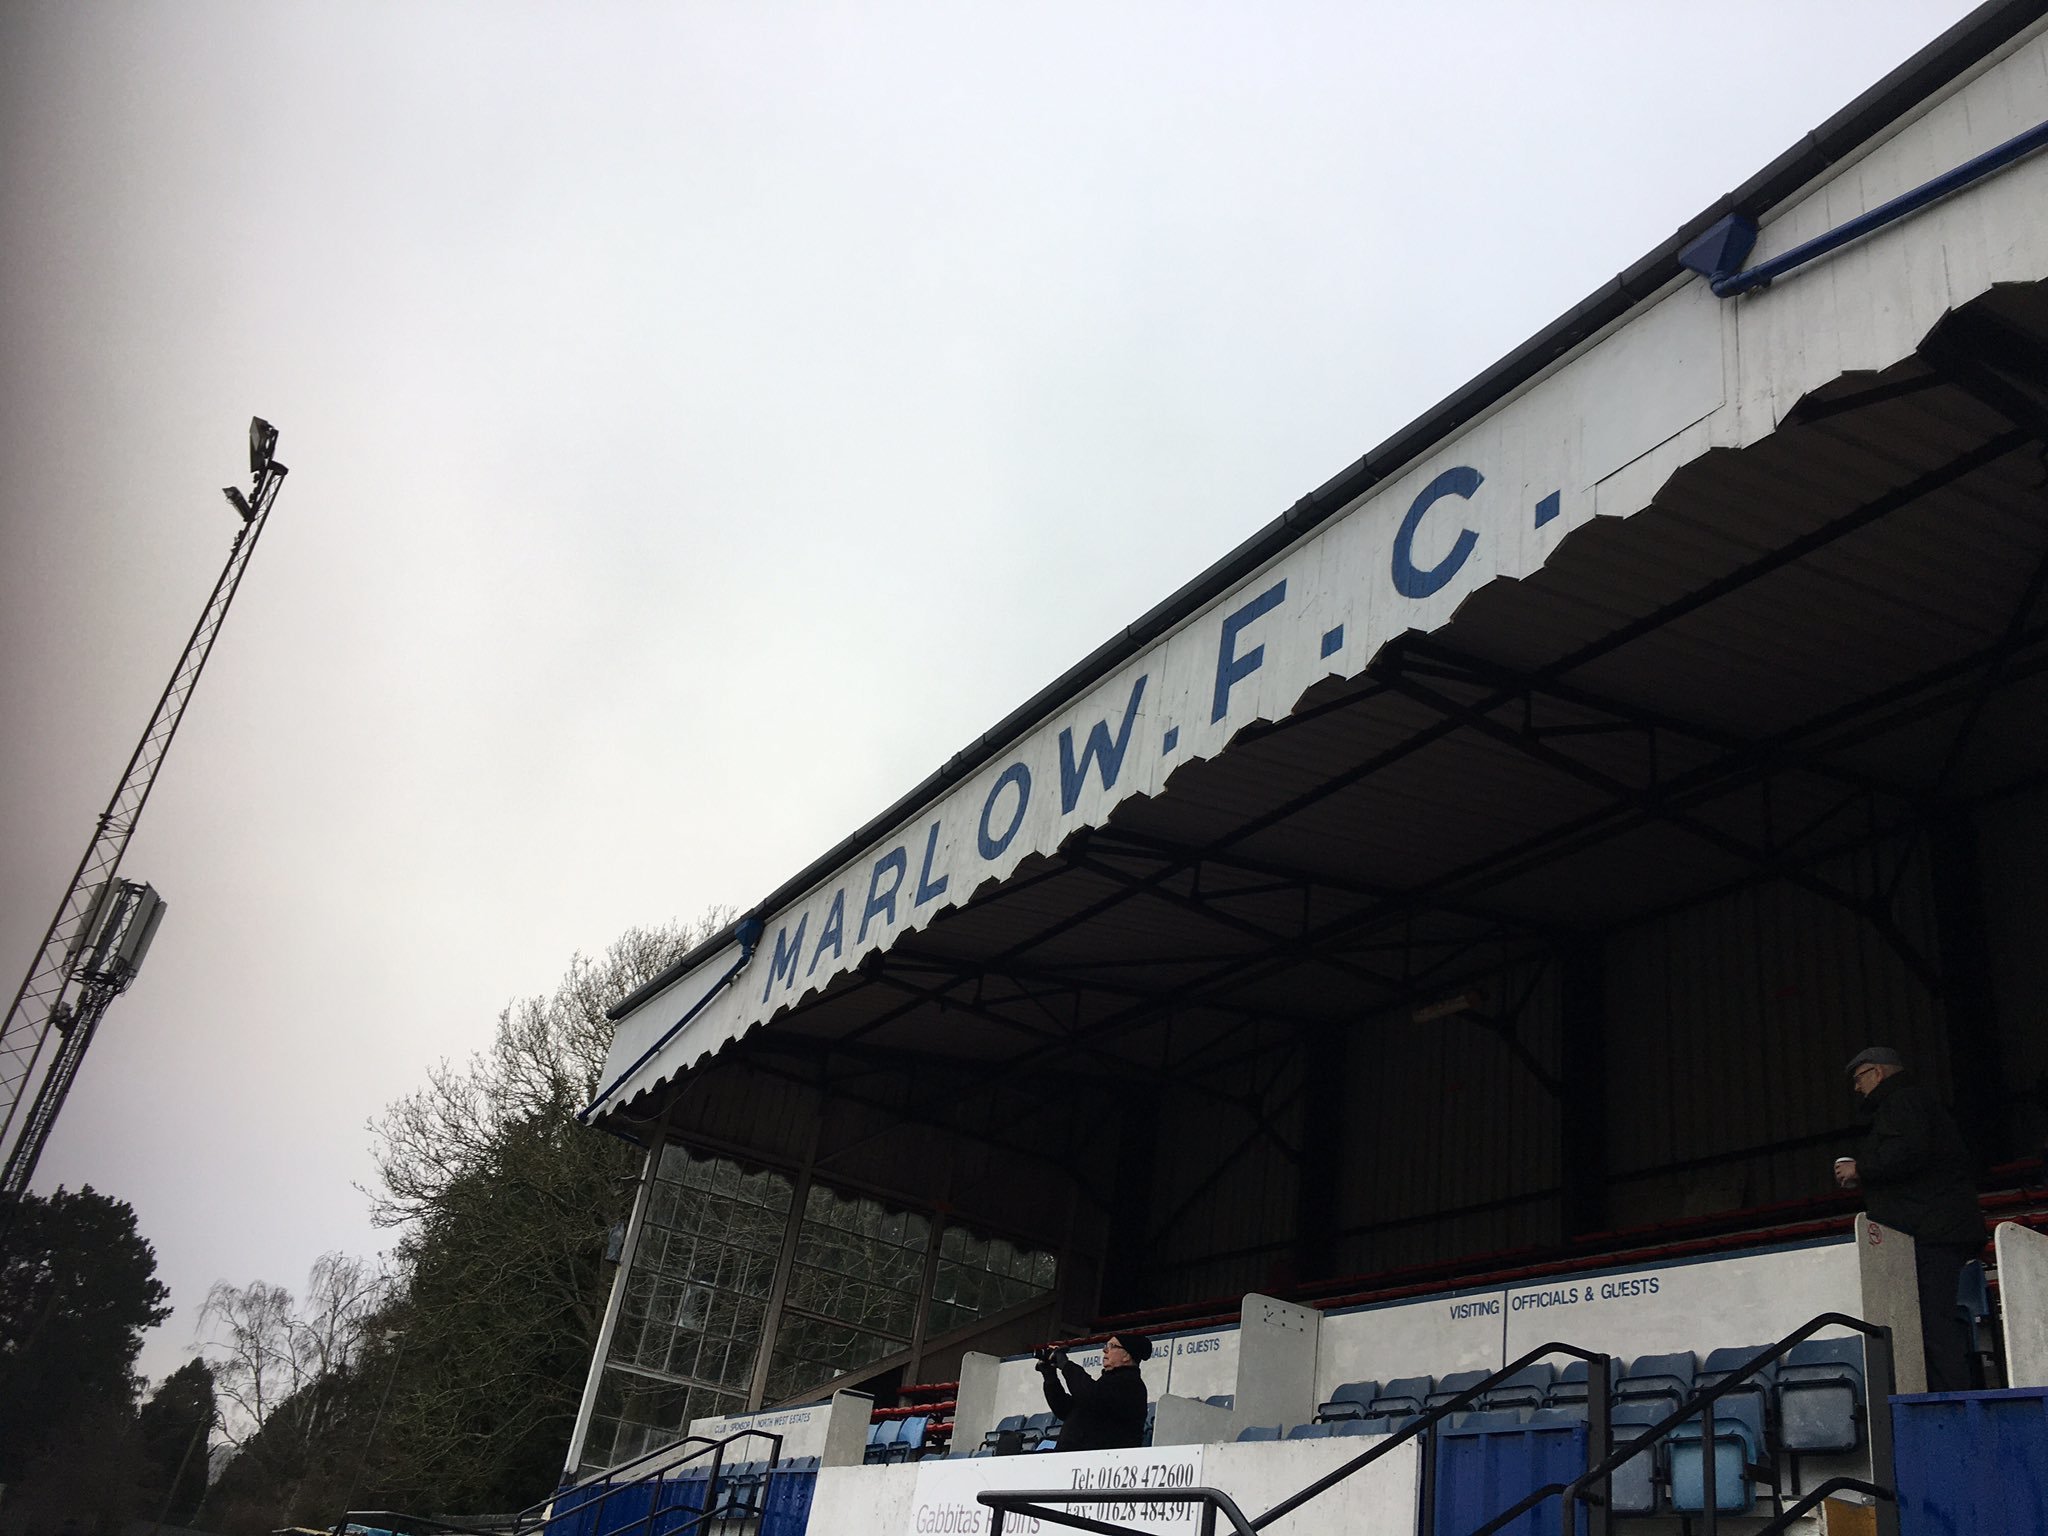 Marlow United and Marlow play at the Alfred Davies Stadium 